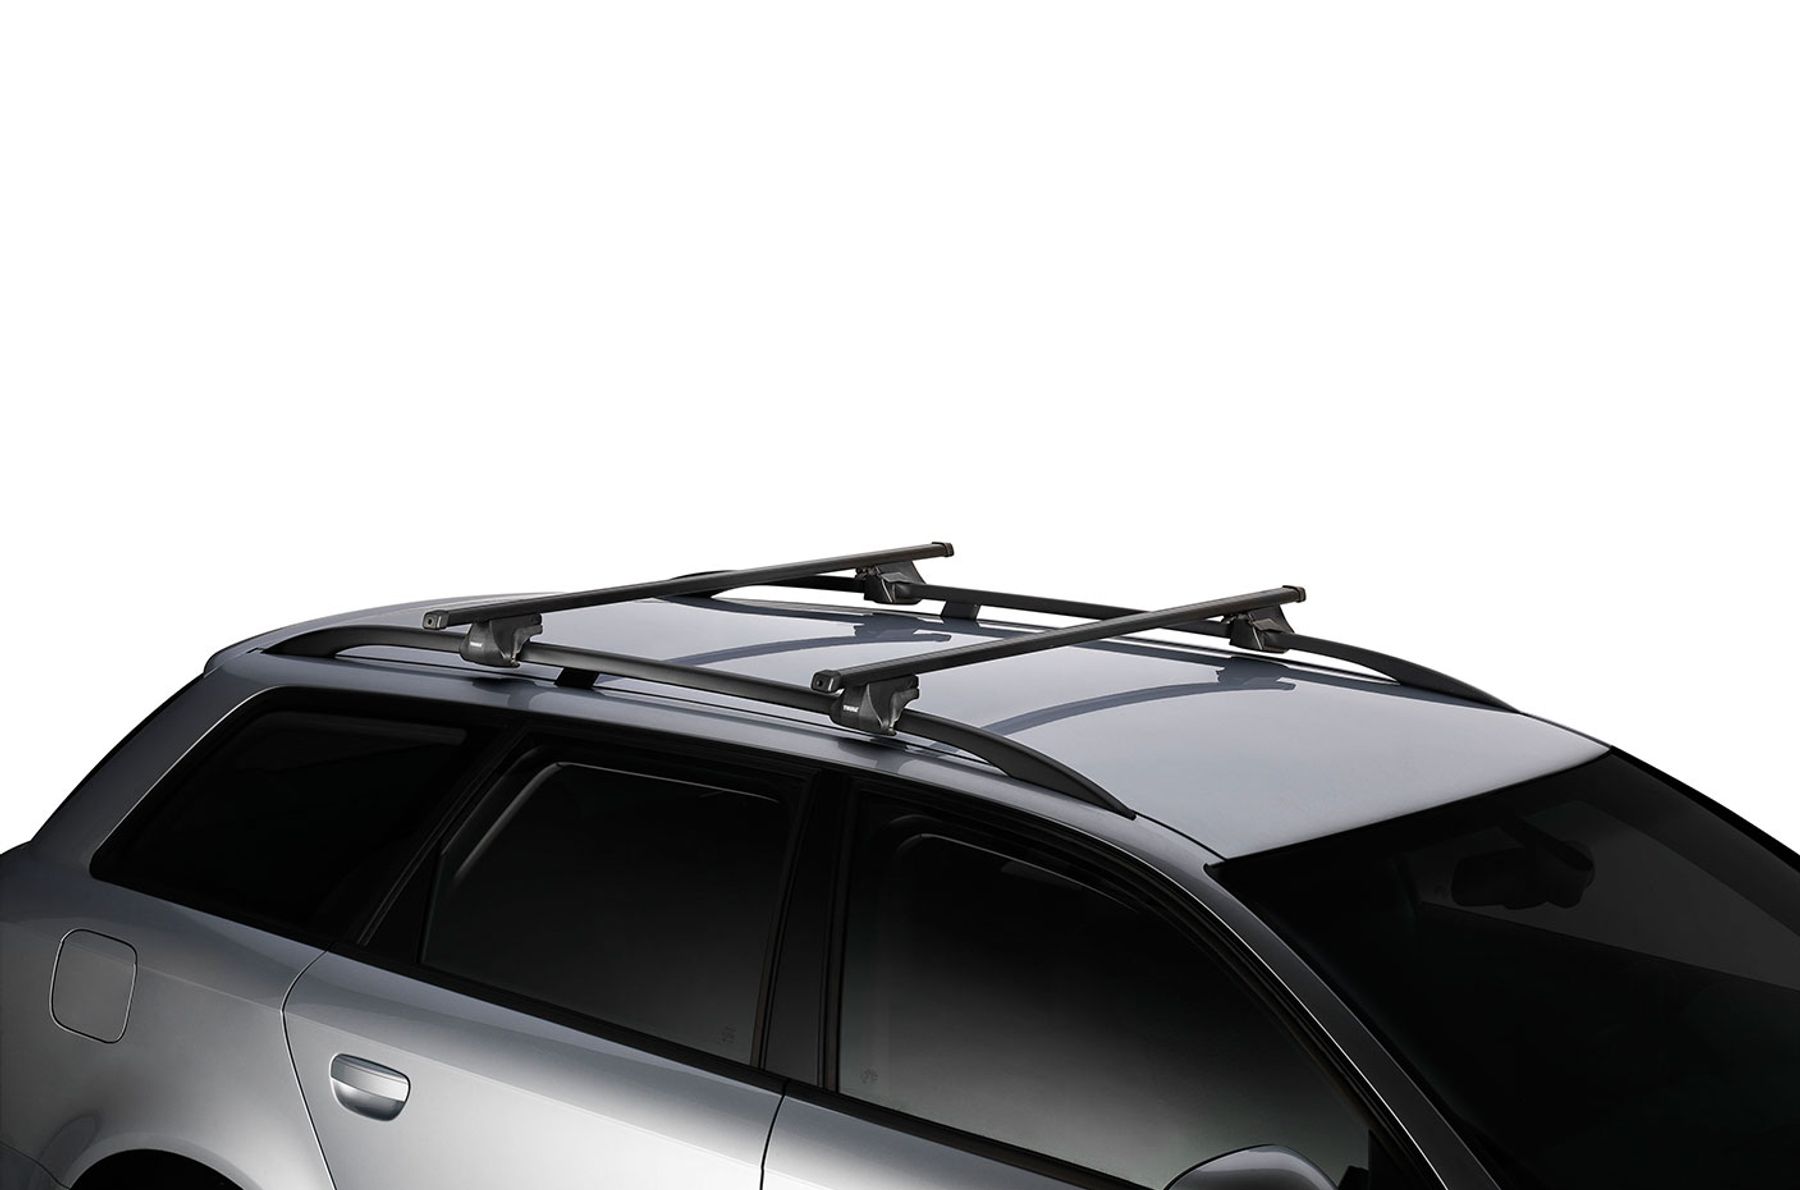 Thule SmartRack Roof Rack System